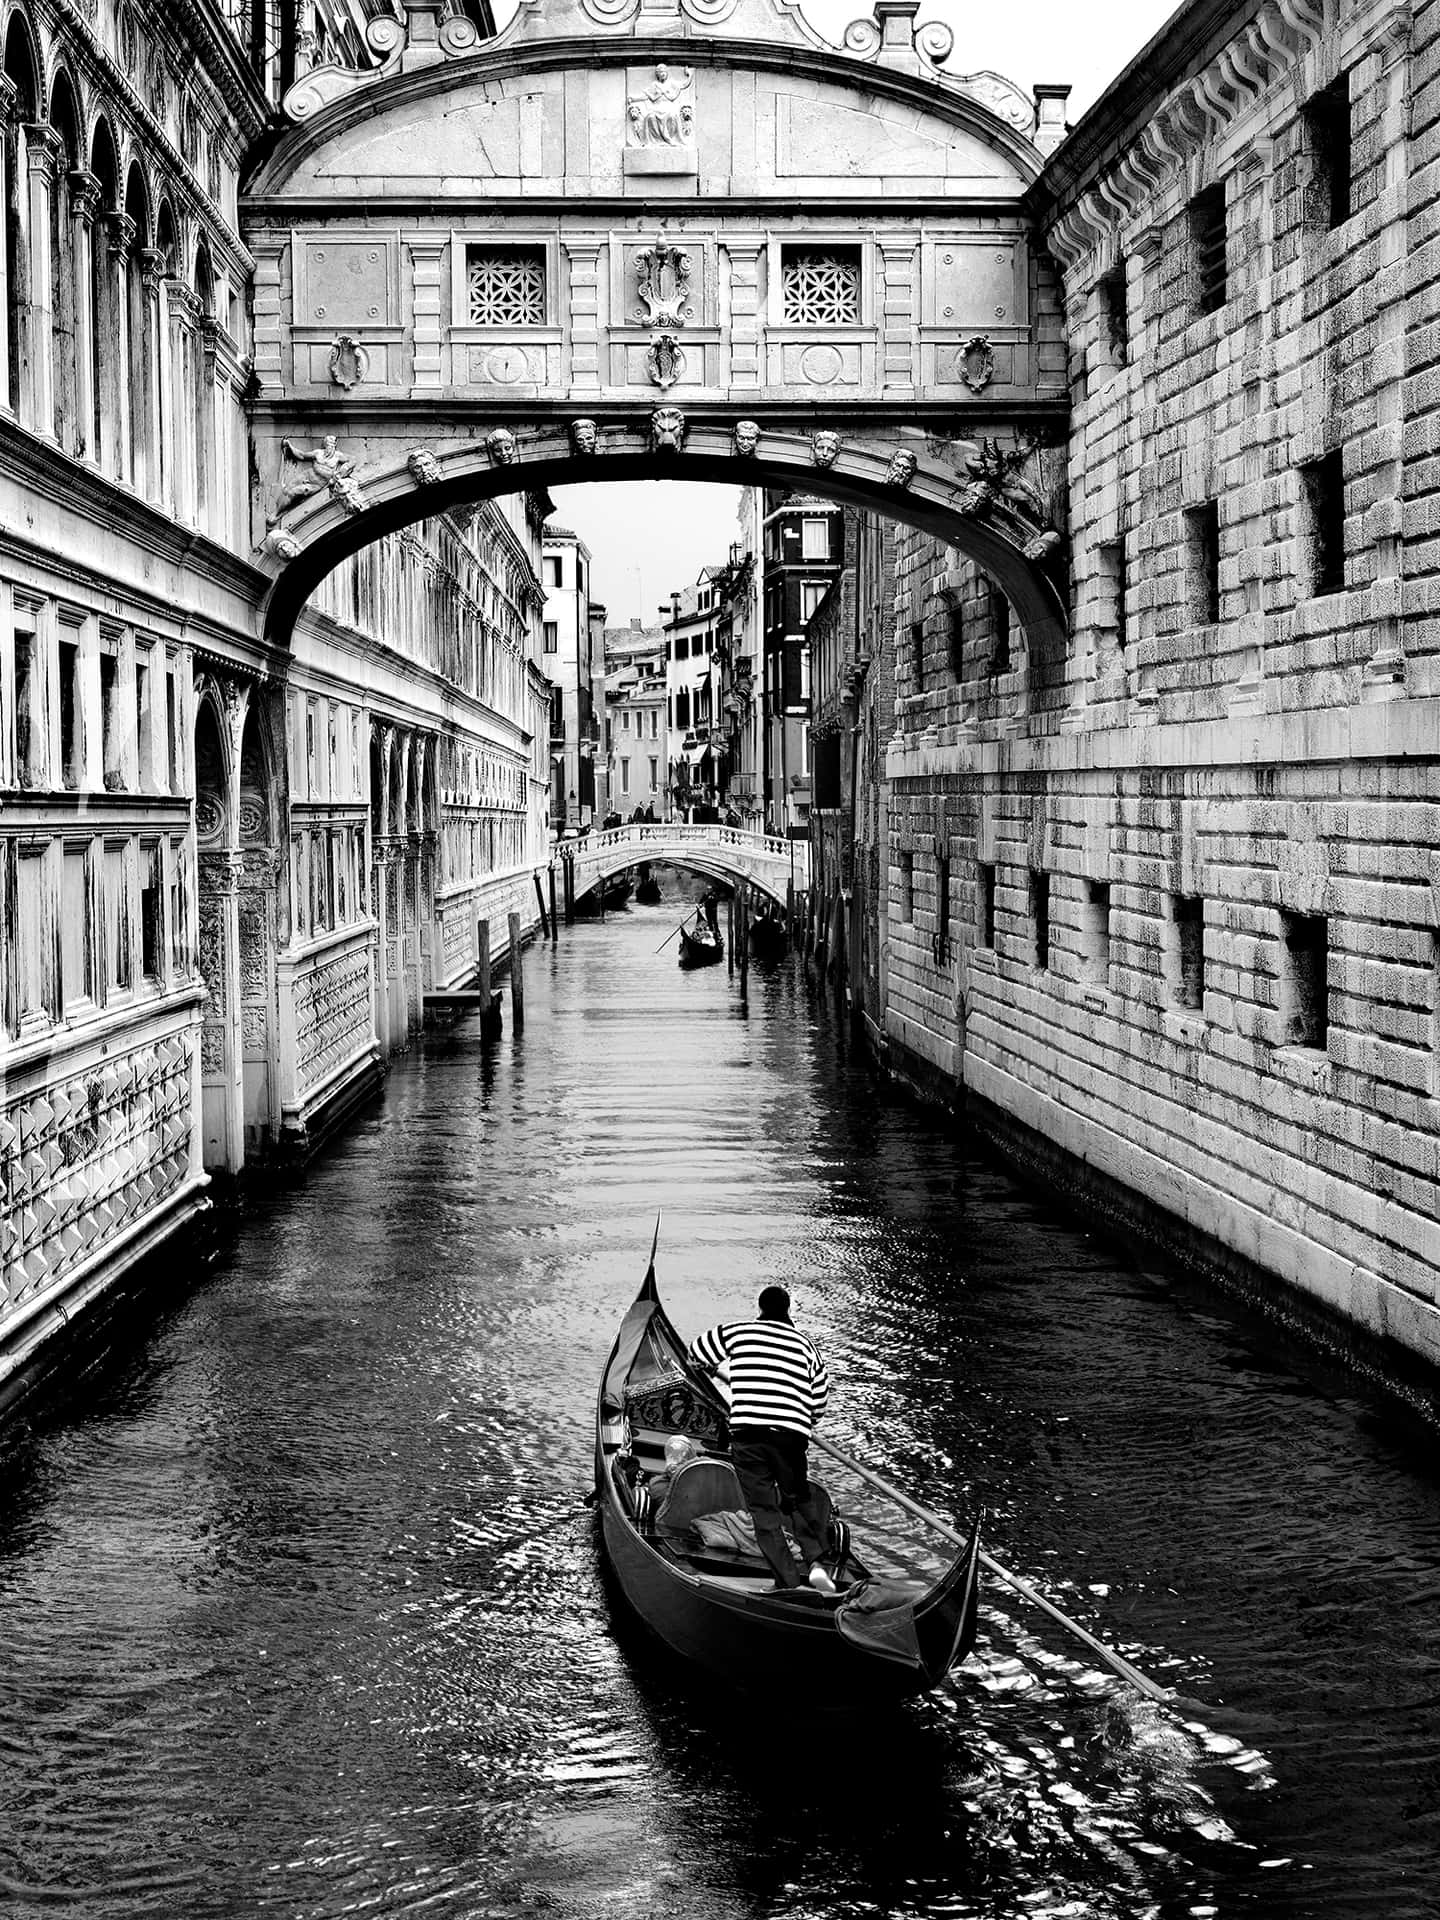 Bridge Of Sighs Black And White Photograph Wallpaper